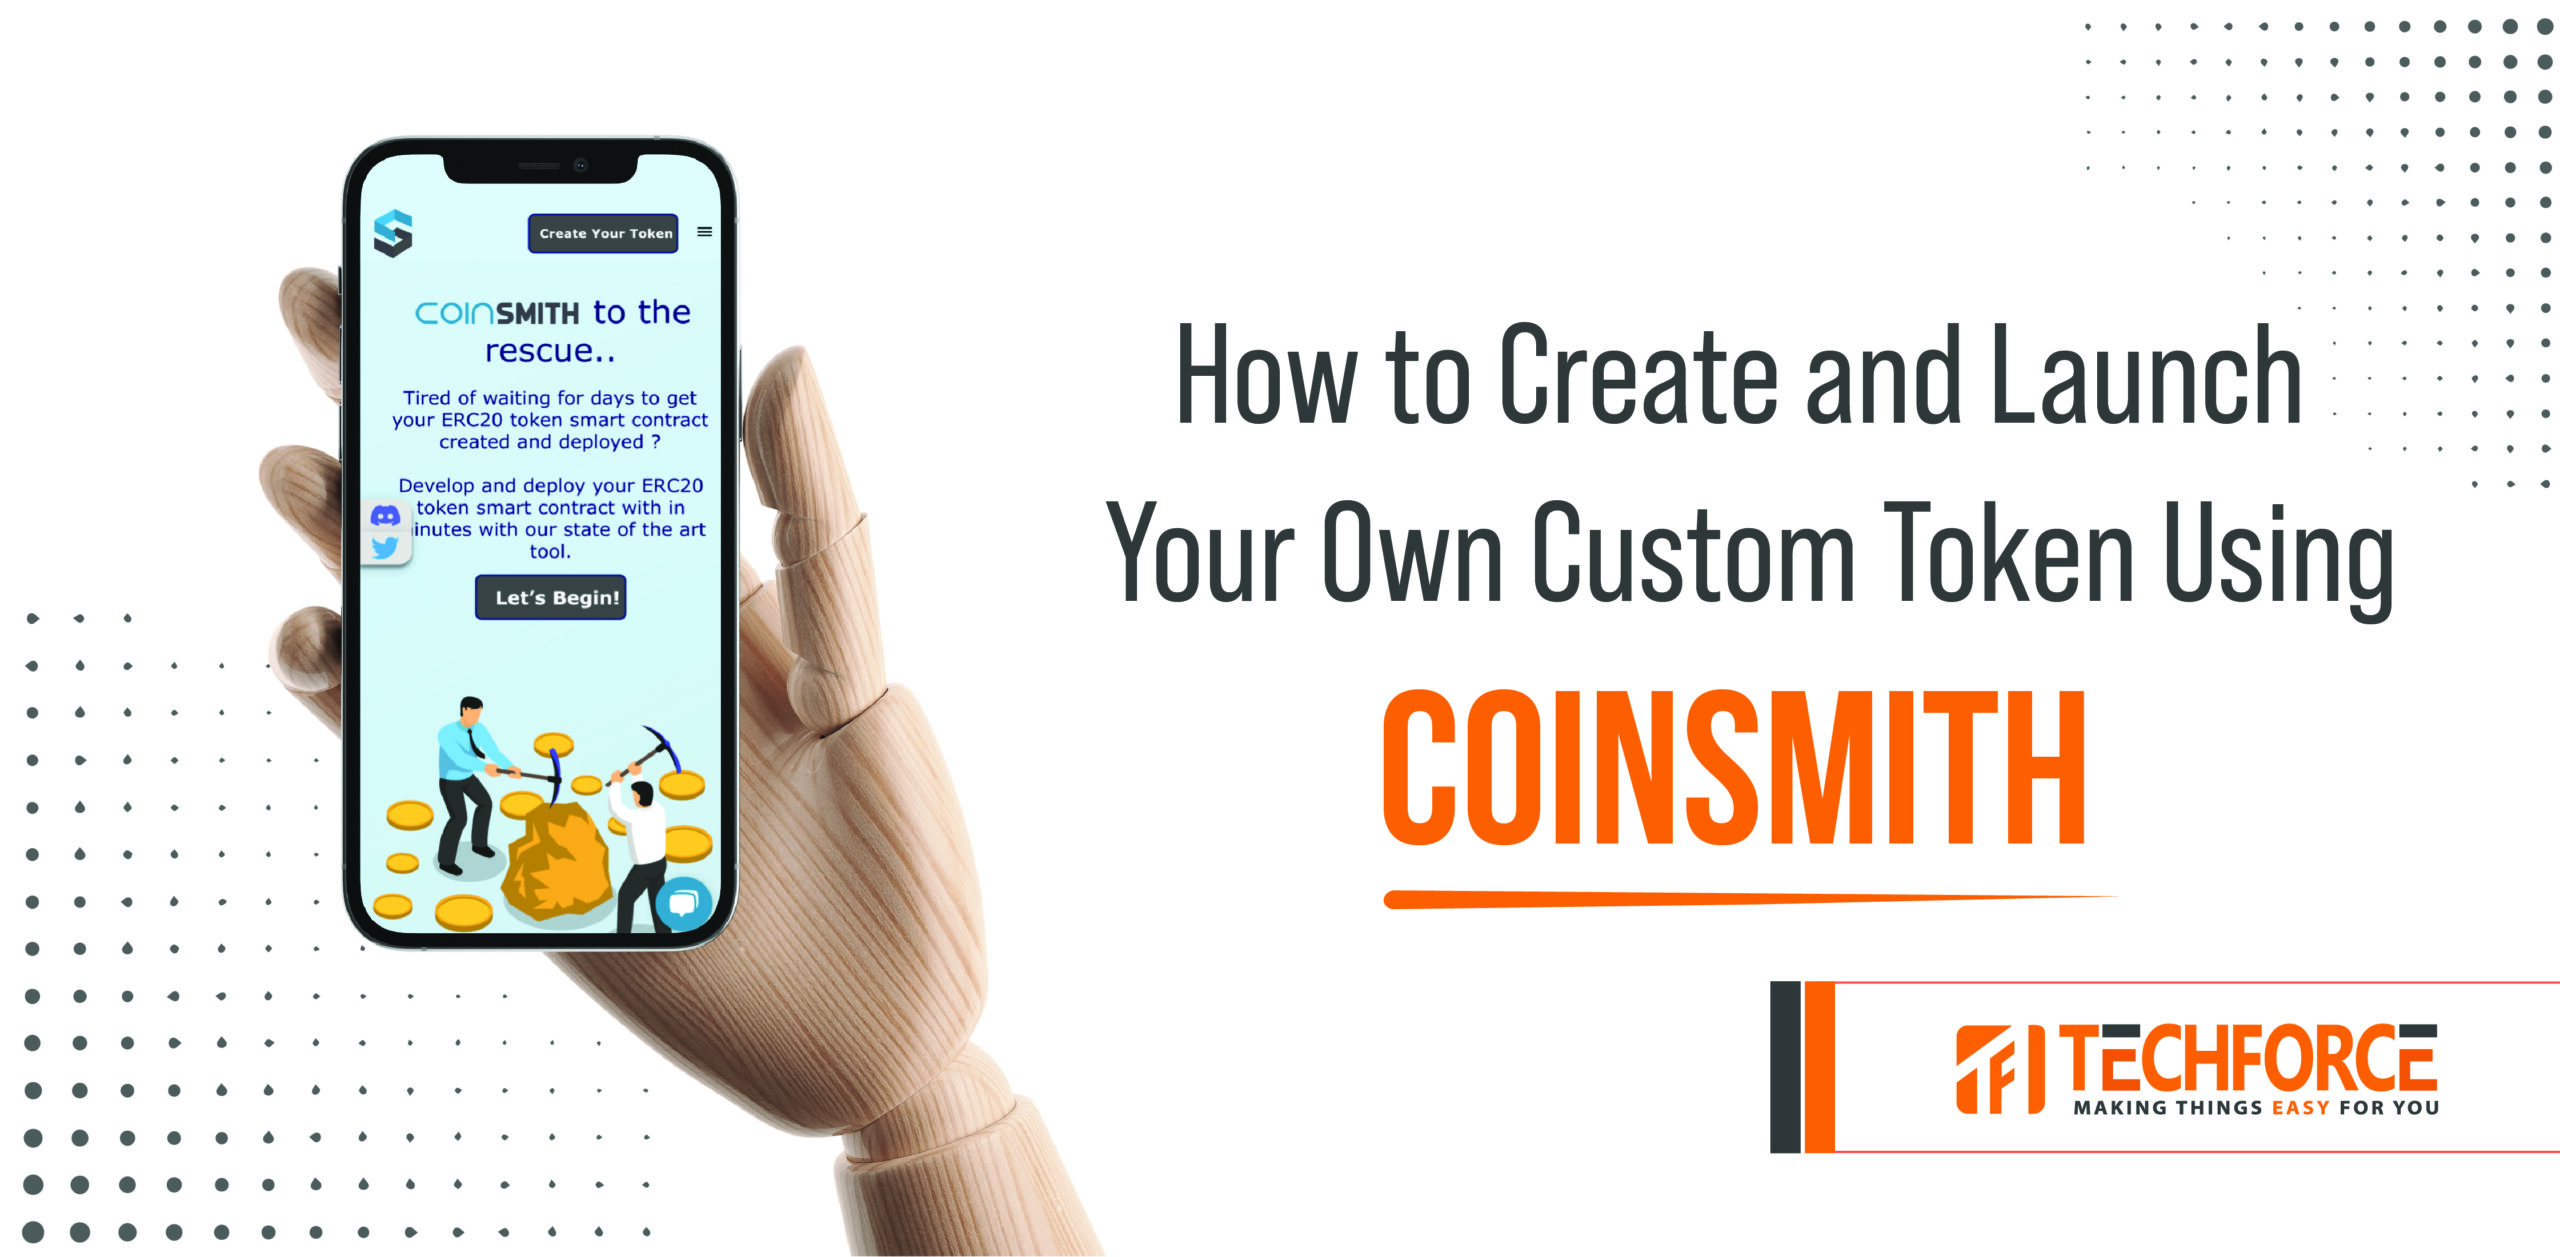 How to Create and Launch Your Own Custom Token Using Coinsmith: A Step-by-Step Guide